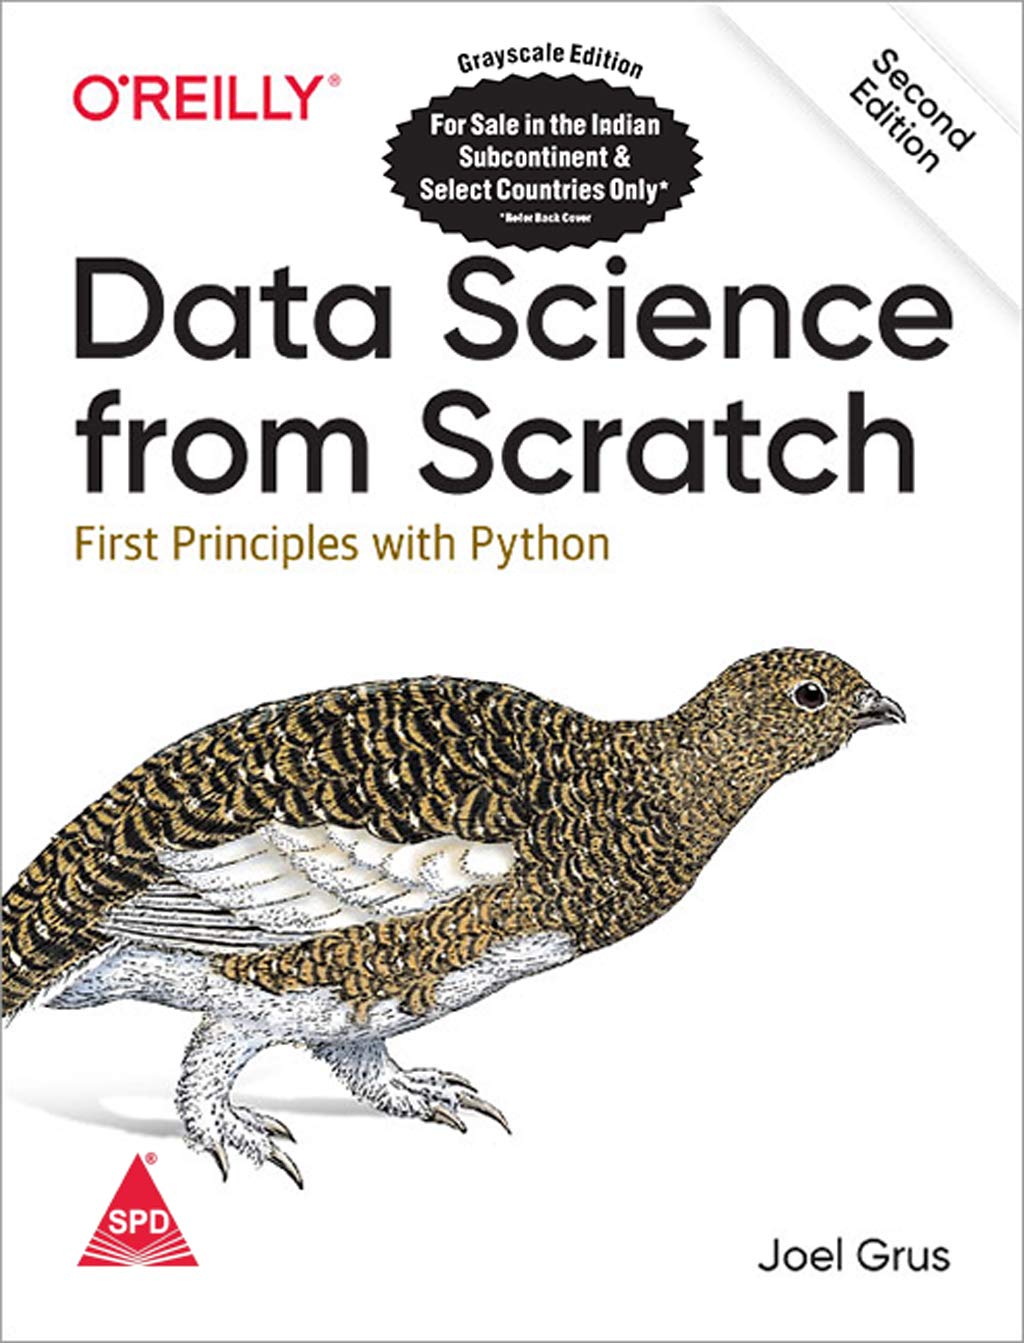 Data Science from Scratch_First Principles with Python (2019) by Joel Grus -  (IG@rkebooks)